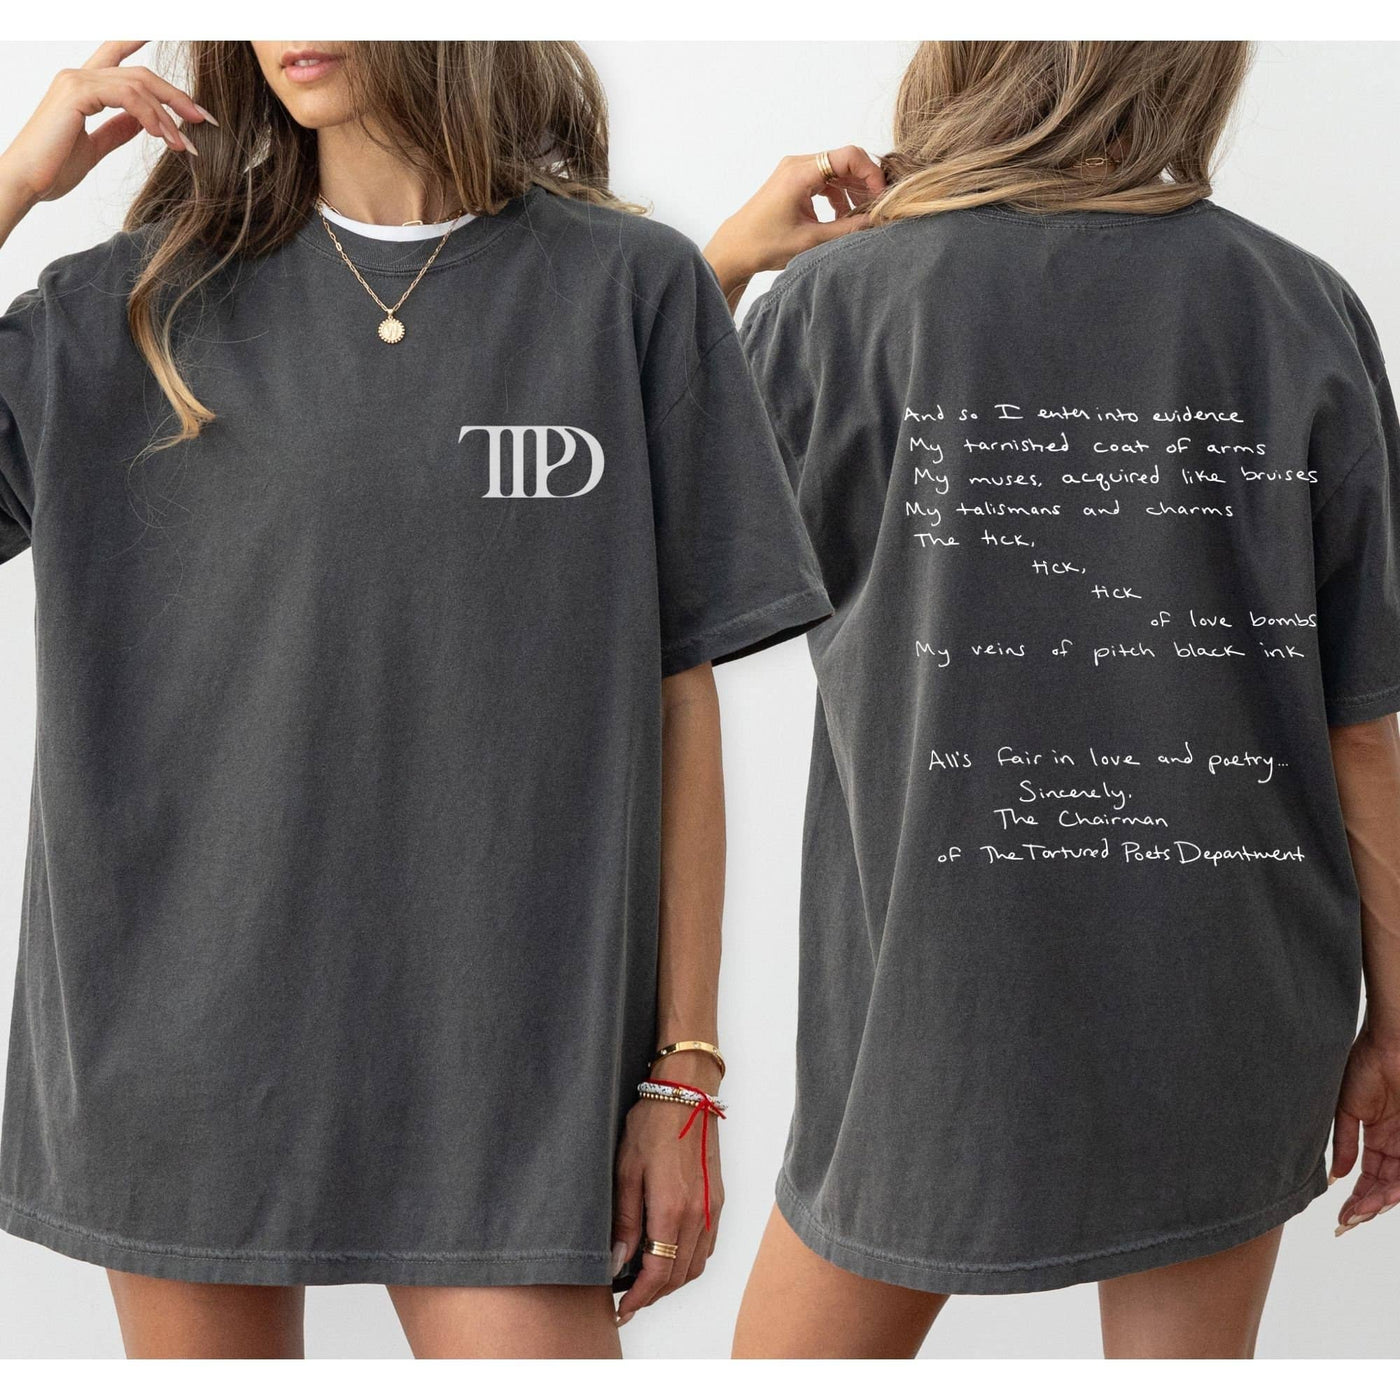 TTPD Shirt from The Tortured Poets Department, Swiftie Tee